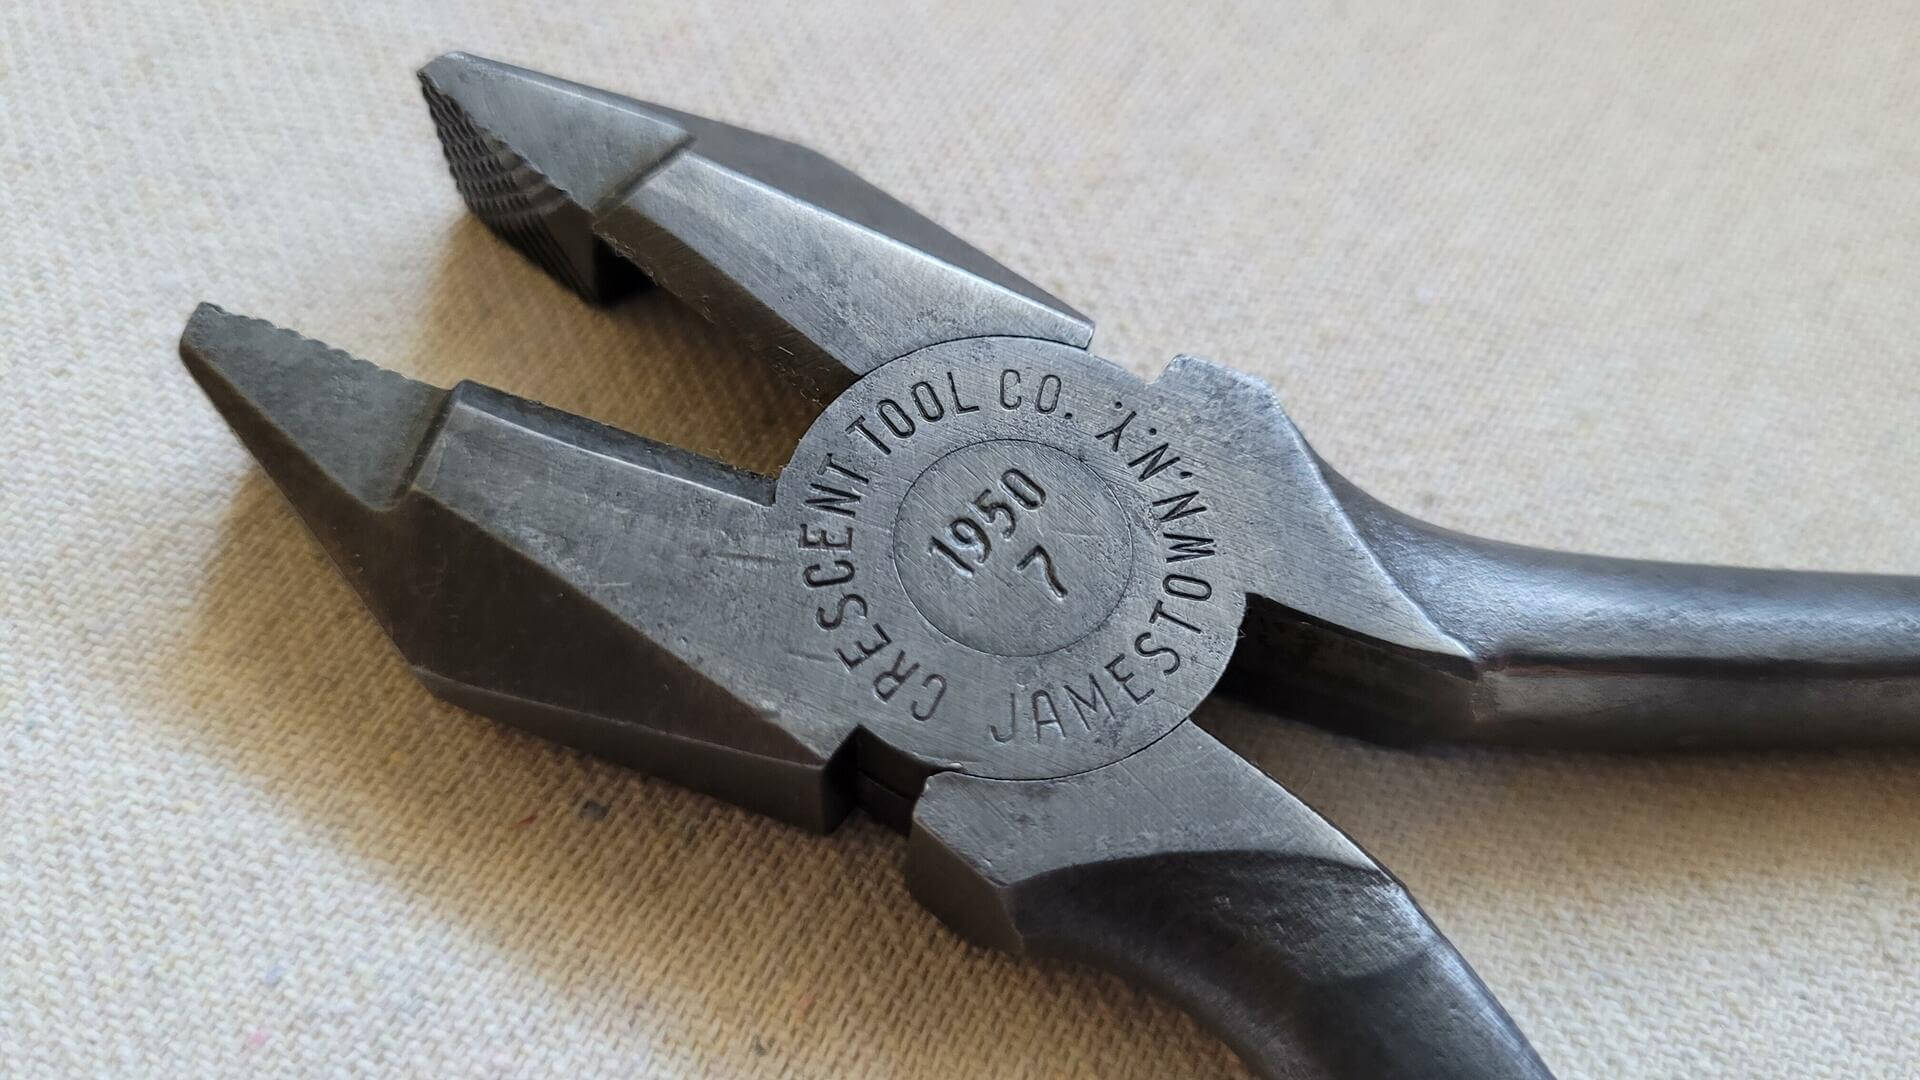 Crescent Tool Co Heavy Duty Linesman's 1950-7 Pliers Jamestown NY - Antique and vintage collectible made in USA electrician hand tool manufactured ca. 1930s to 1950s